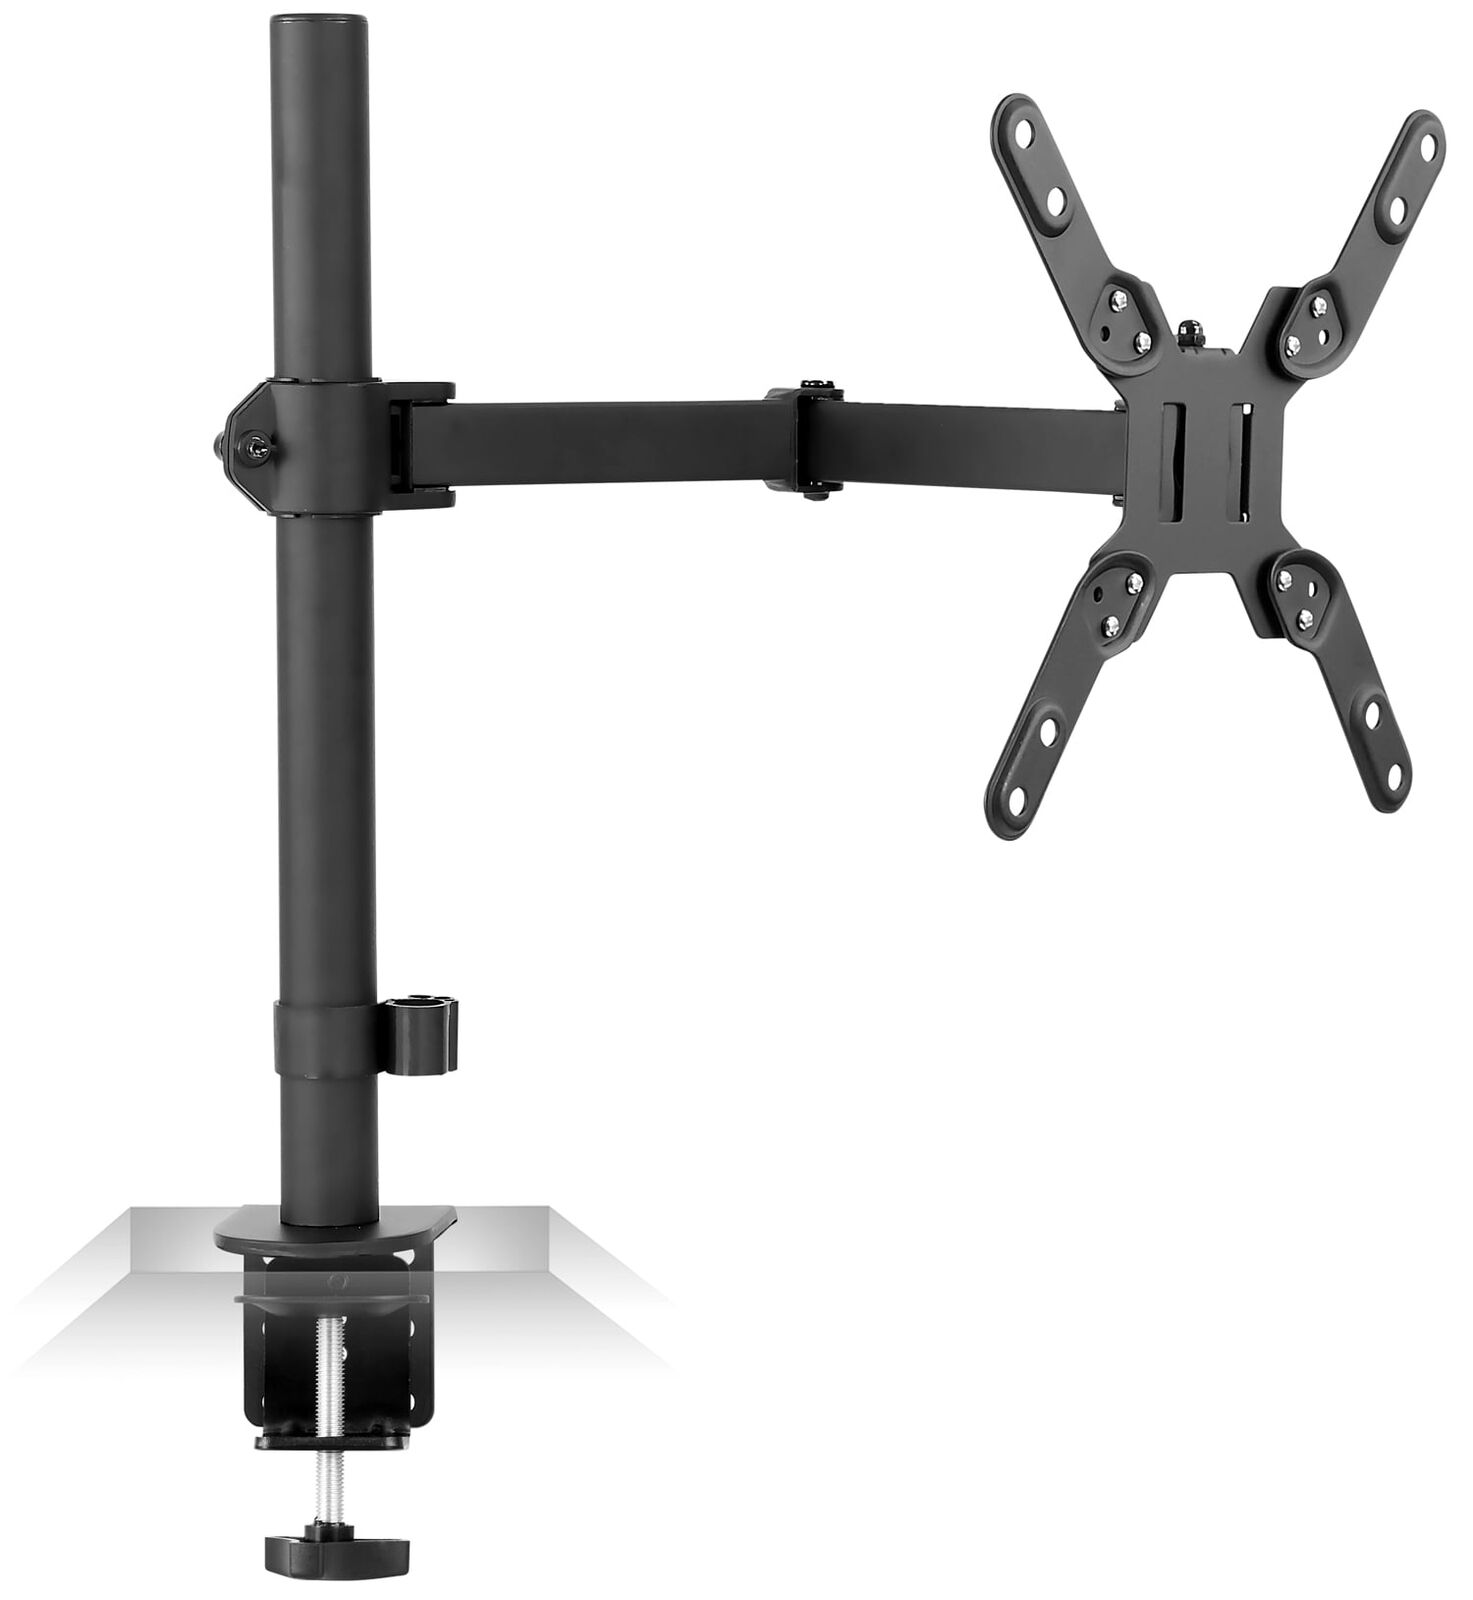 Large Computer Monitor Desk Mount Fits 23- 42 in Screens Clamp and Grommet Base